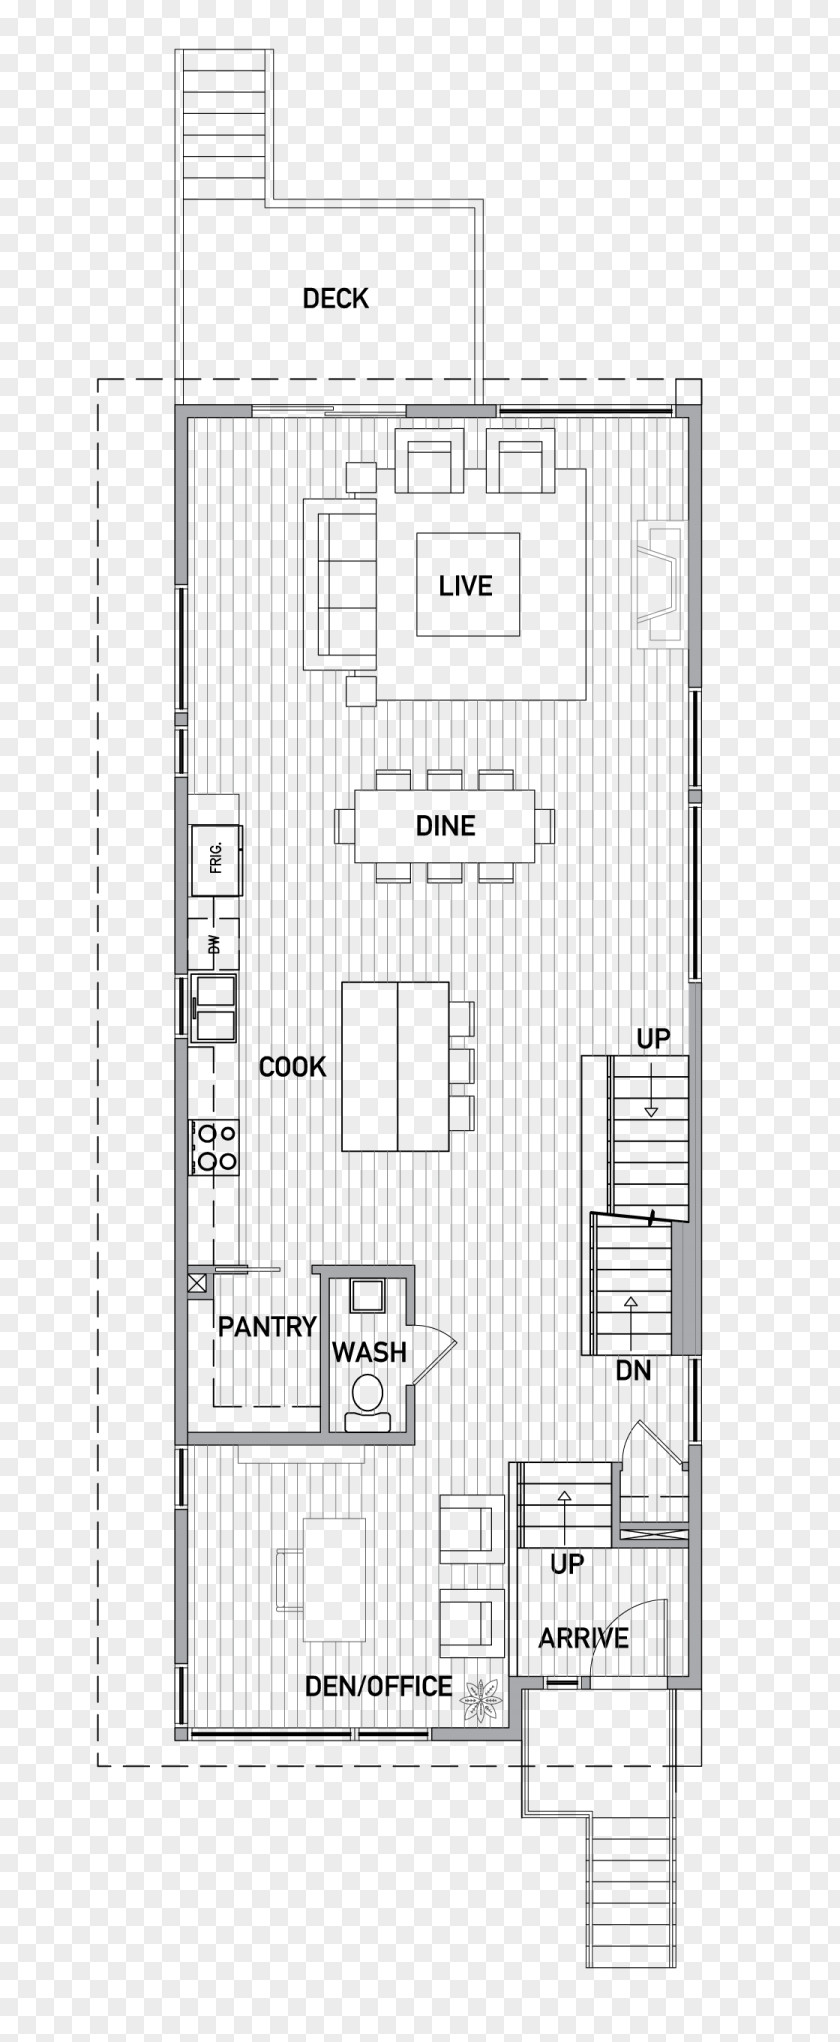 Concession Stand Floor Plan Architecture PNG